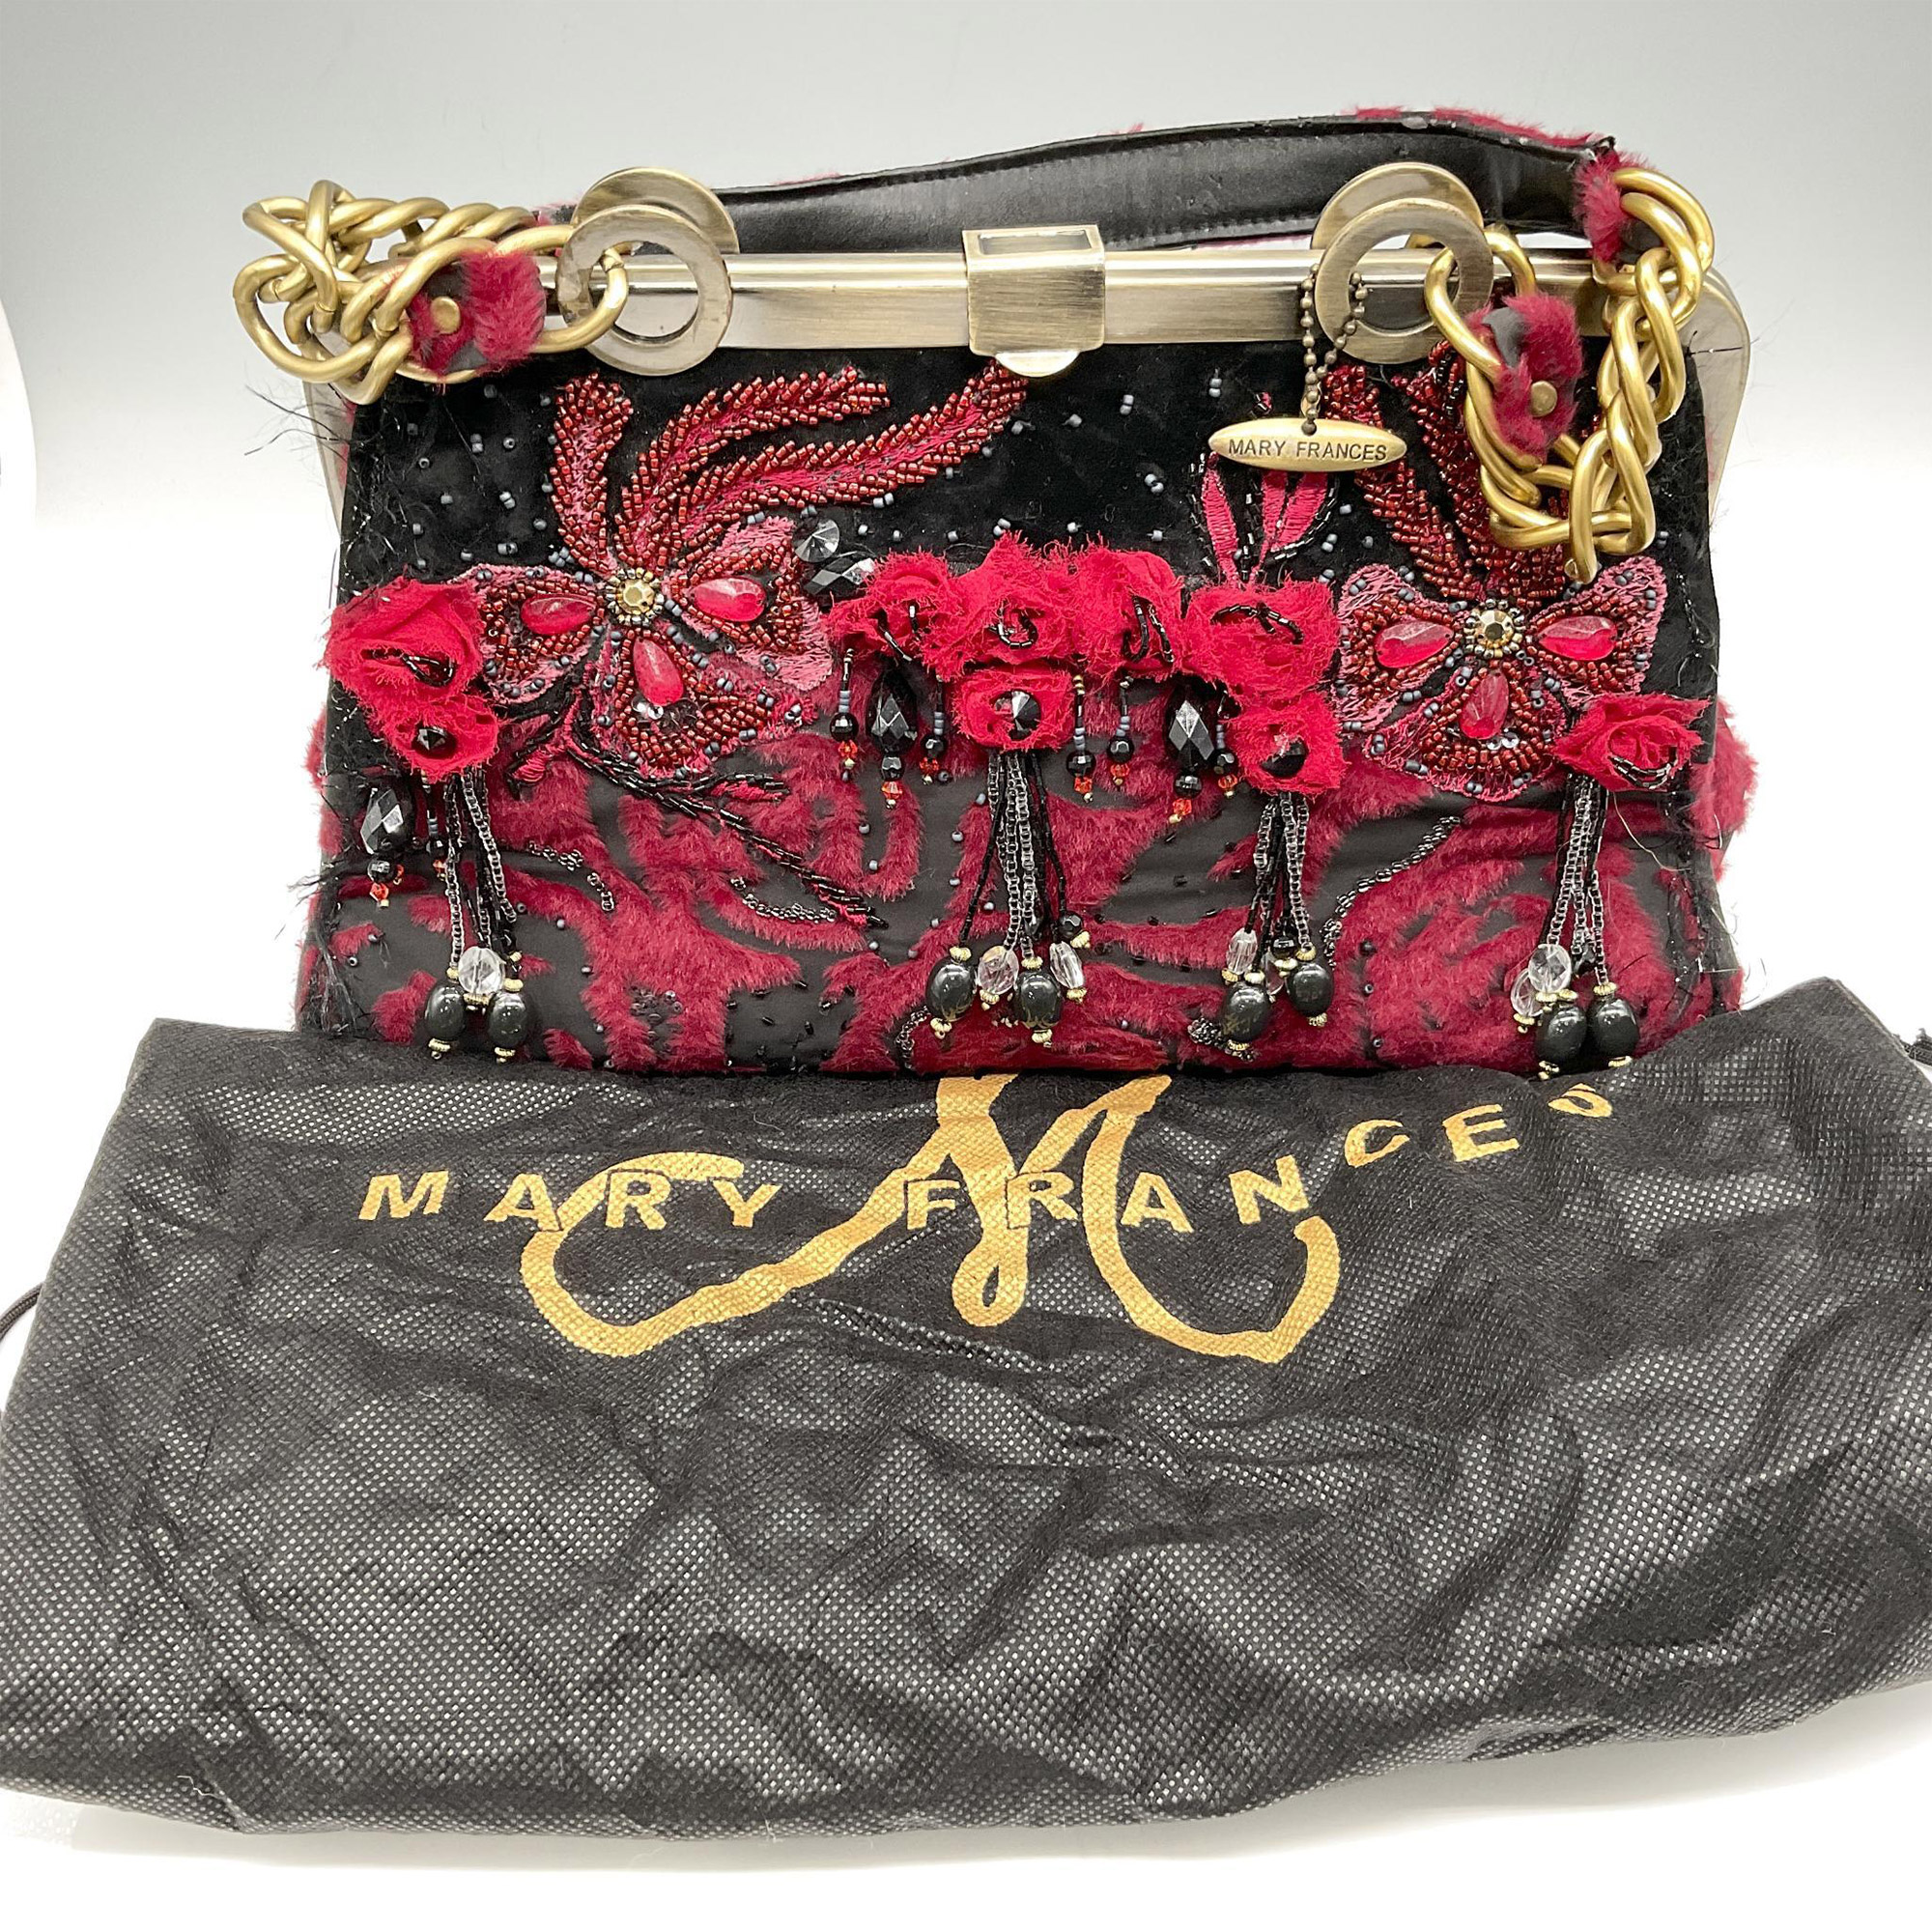 Mary Frances Handbag, Roses are Red - Image 4 of 4